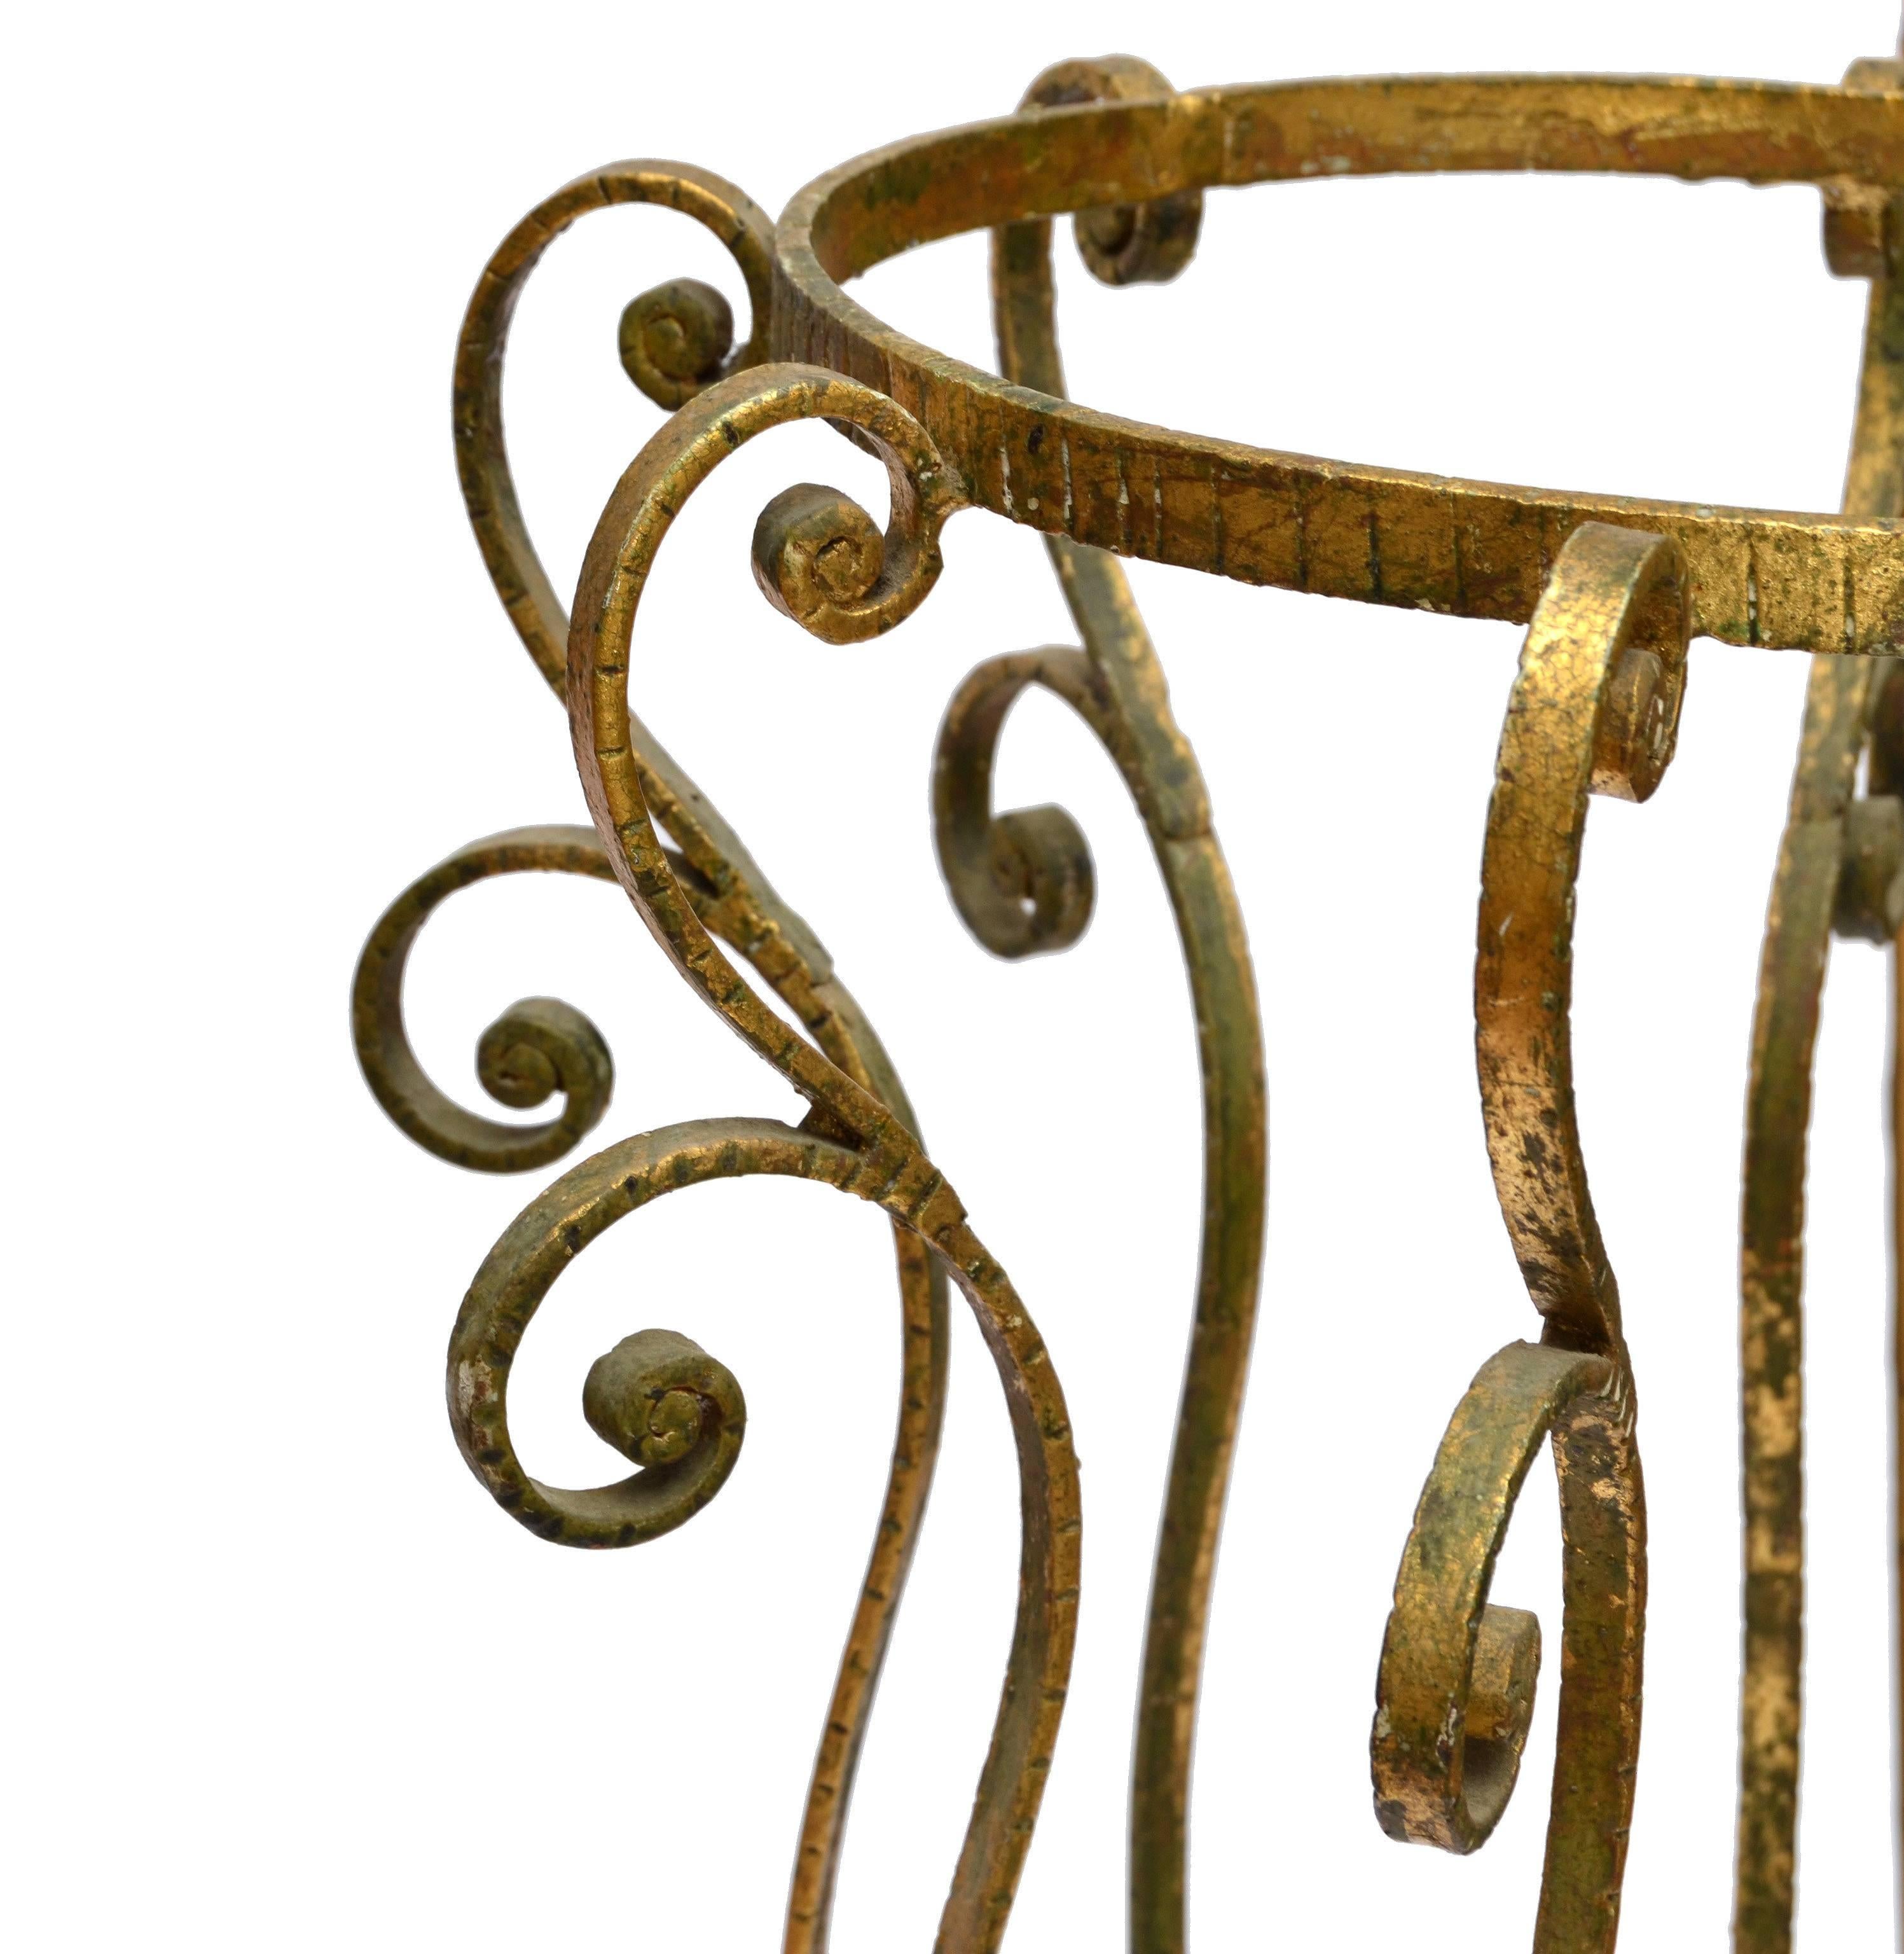 Hand-Crafted Art Deco Style Gilt Wrought Iron Umbrella Stand by Pier Luigi Colli Italy 1950s  For Sale